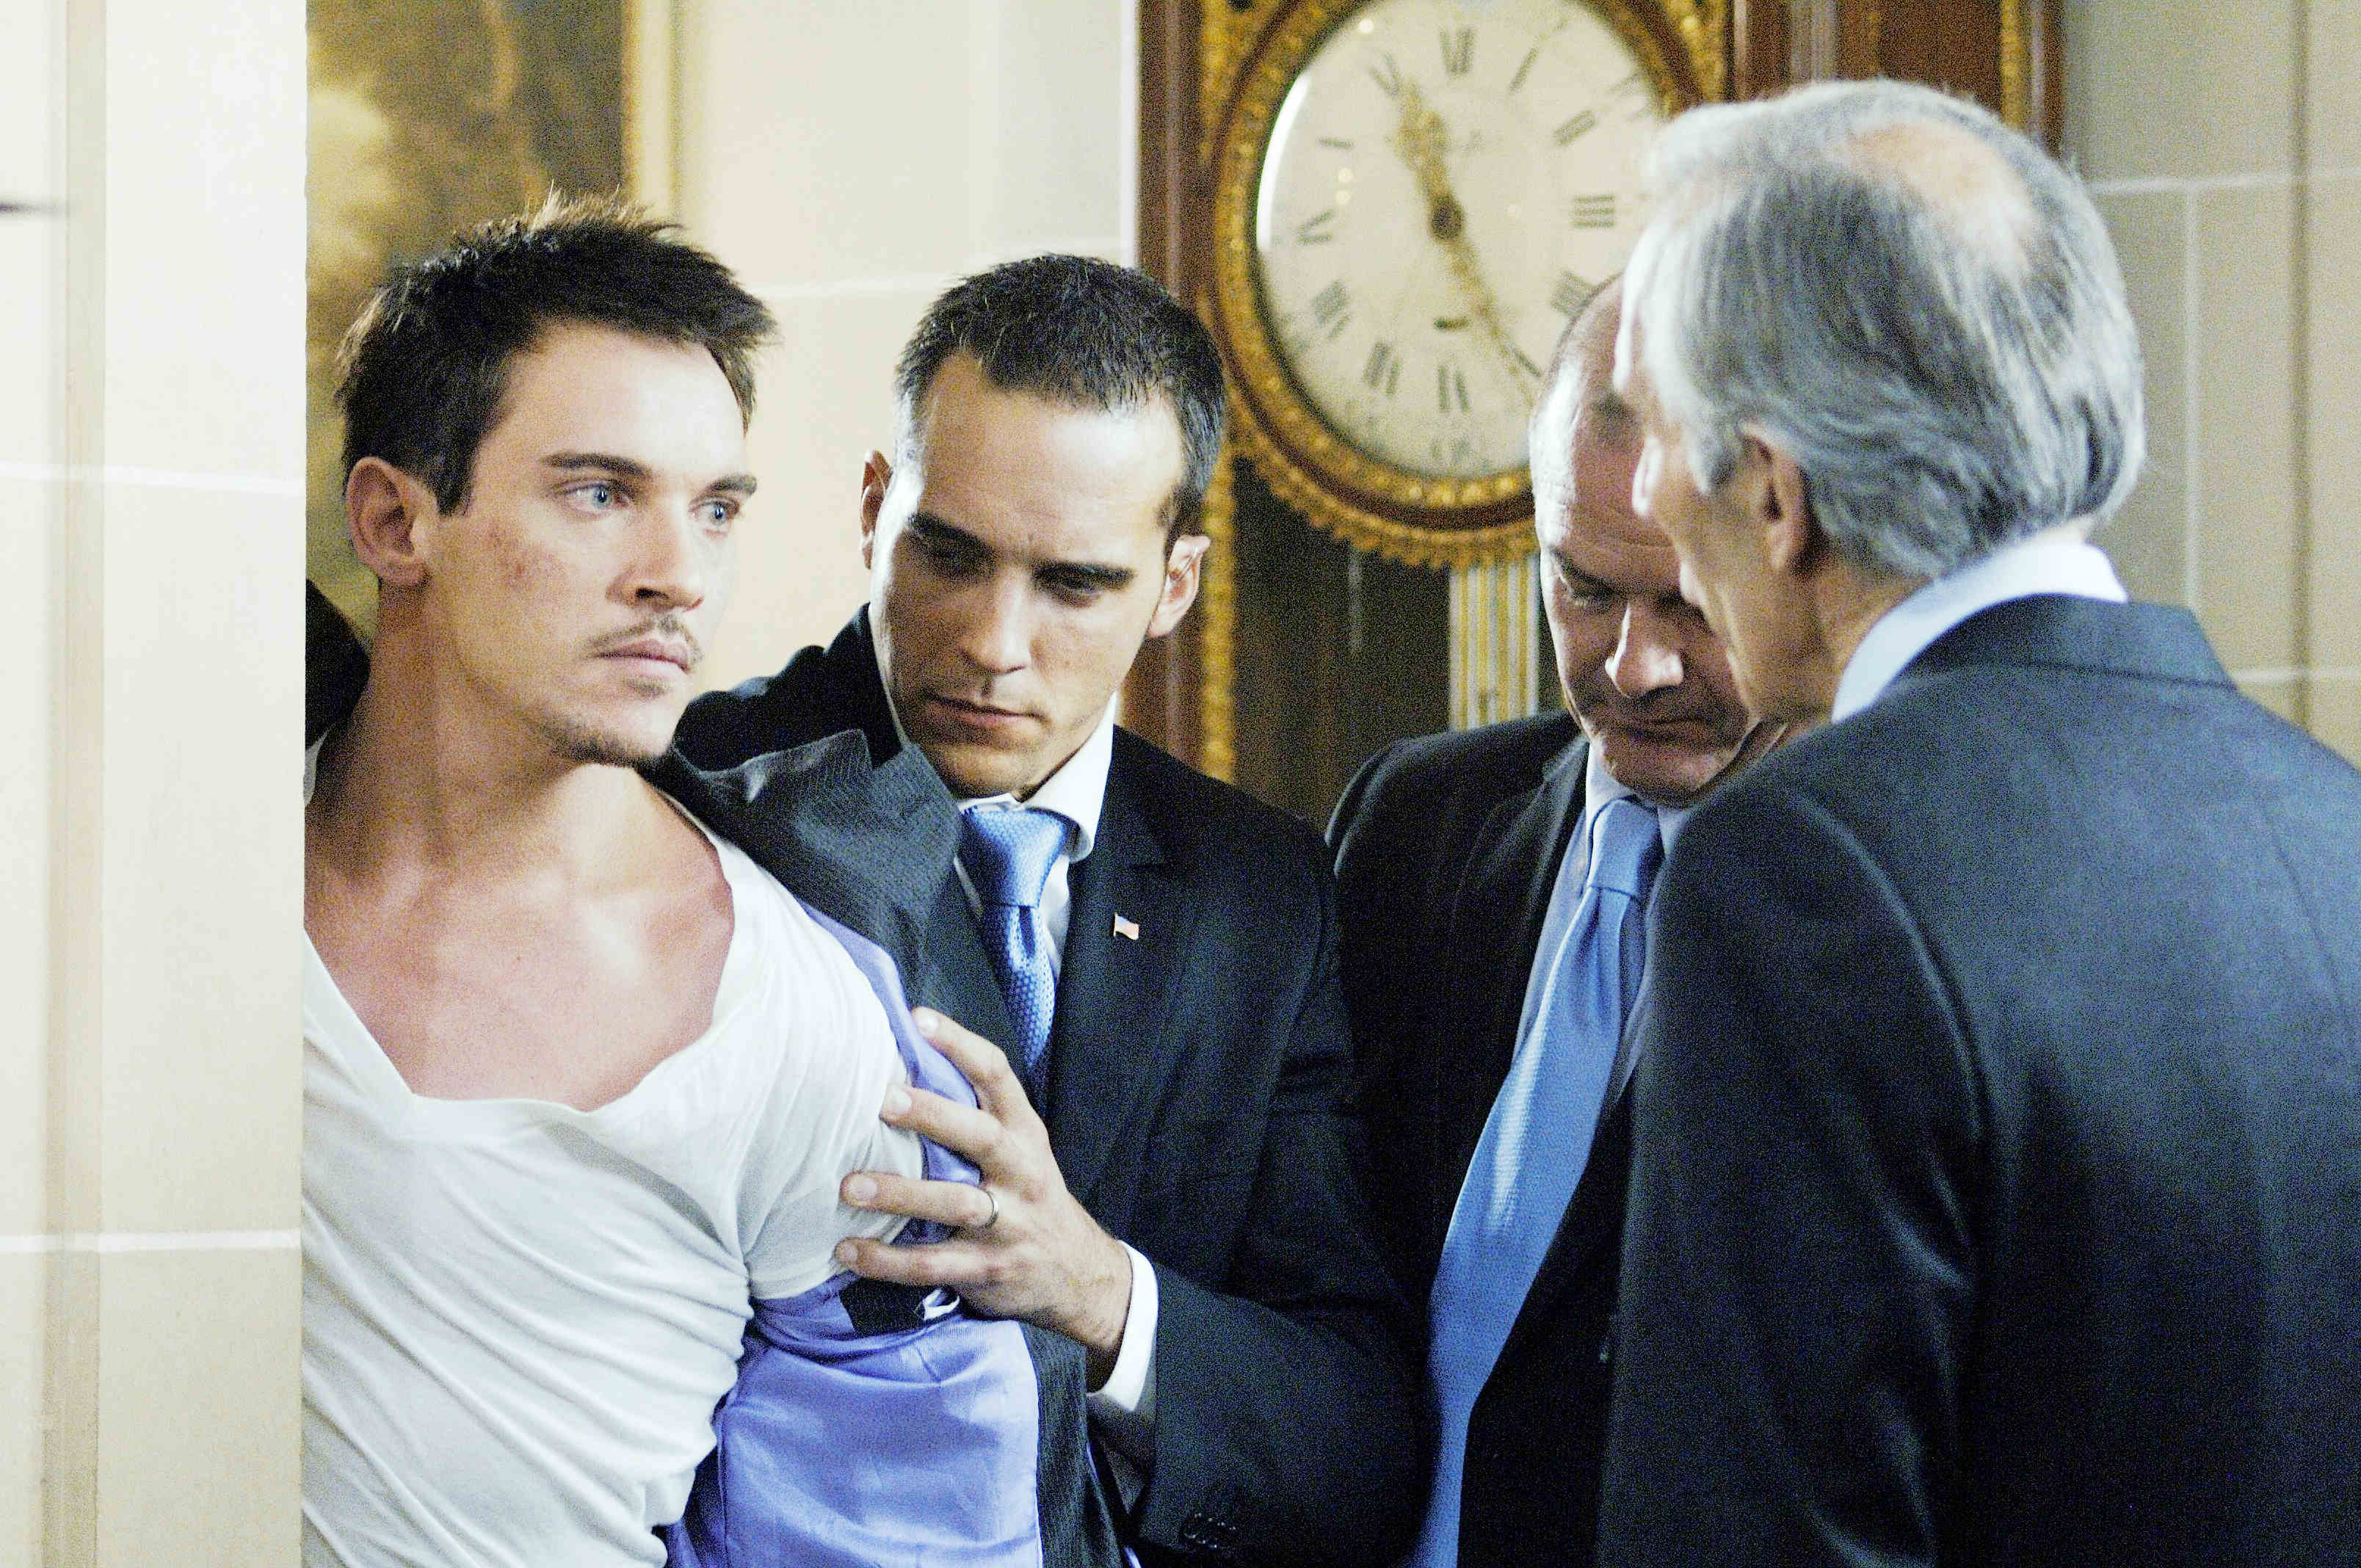 Jonathan Rhys-Meyers stars as James Reece/Richard Stevens in Lionsgate Films' From Paris with Love (2010). Photo credit by Susie Allnutt.